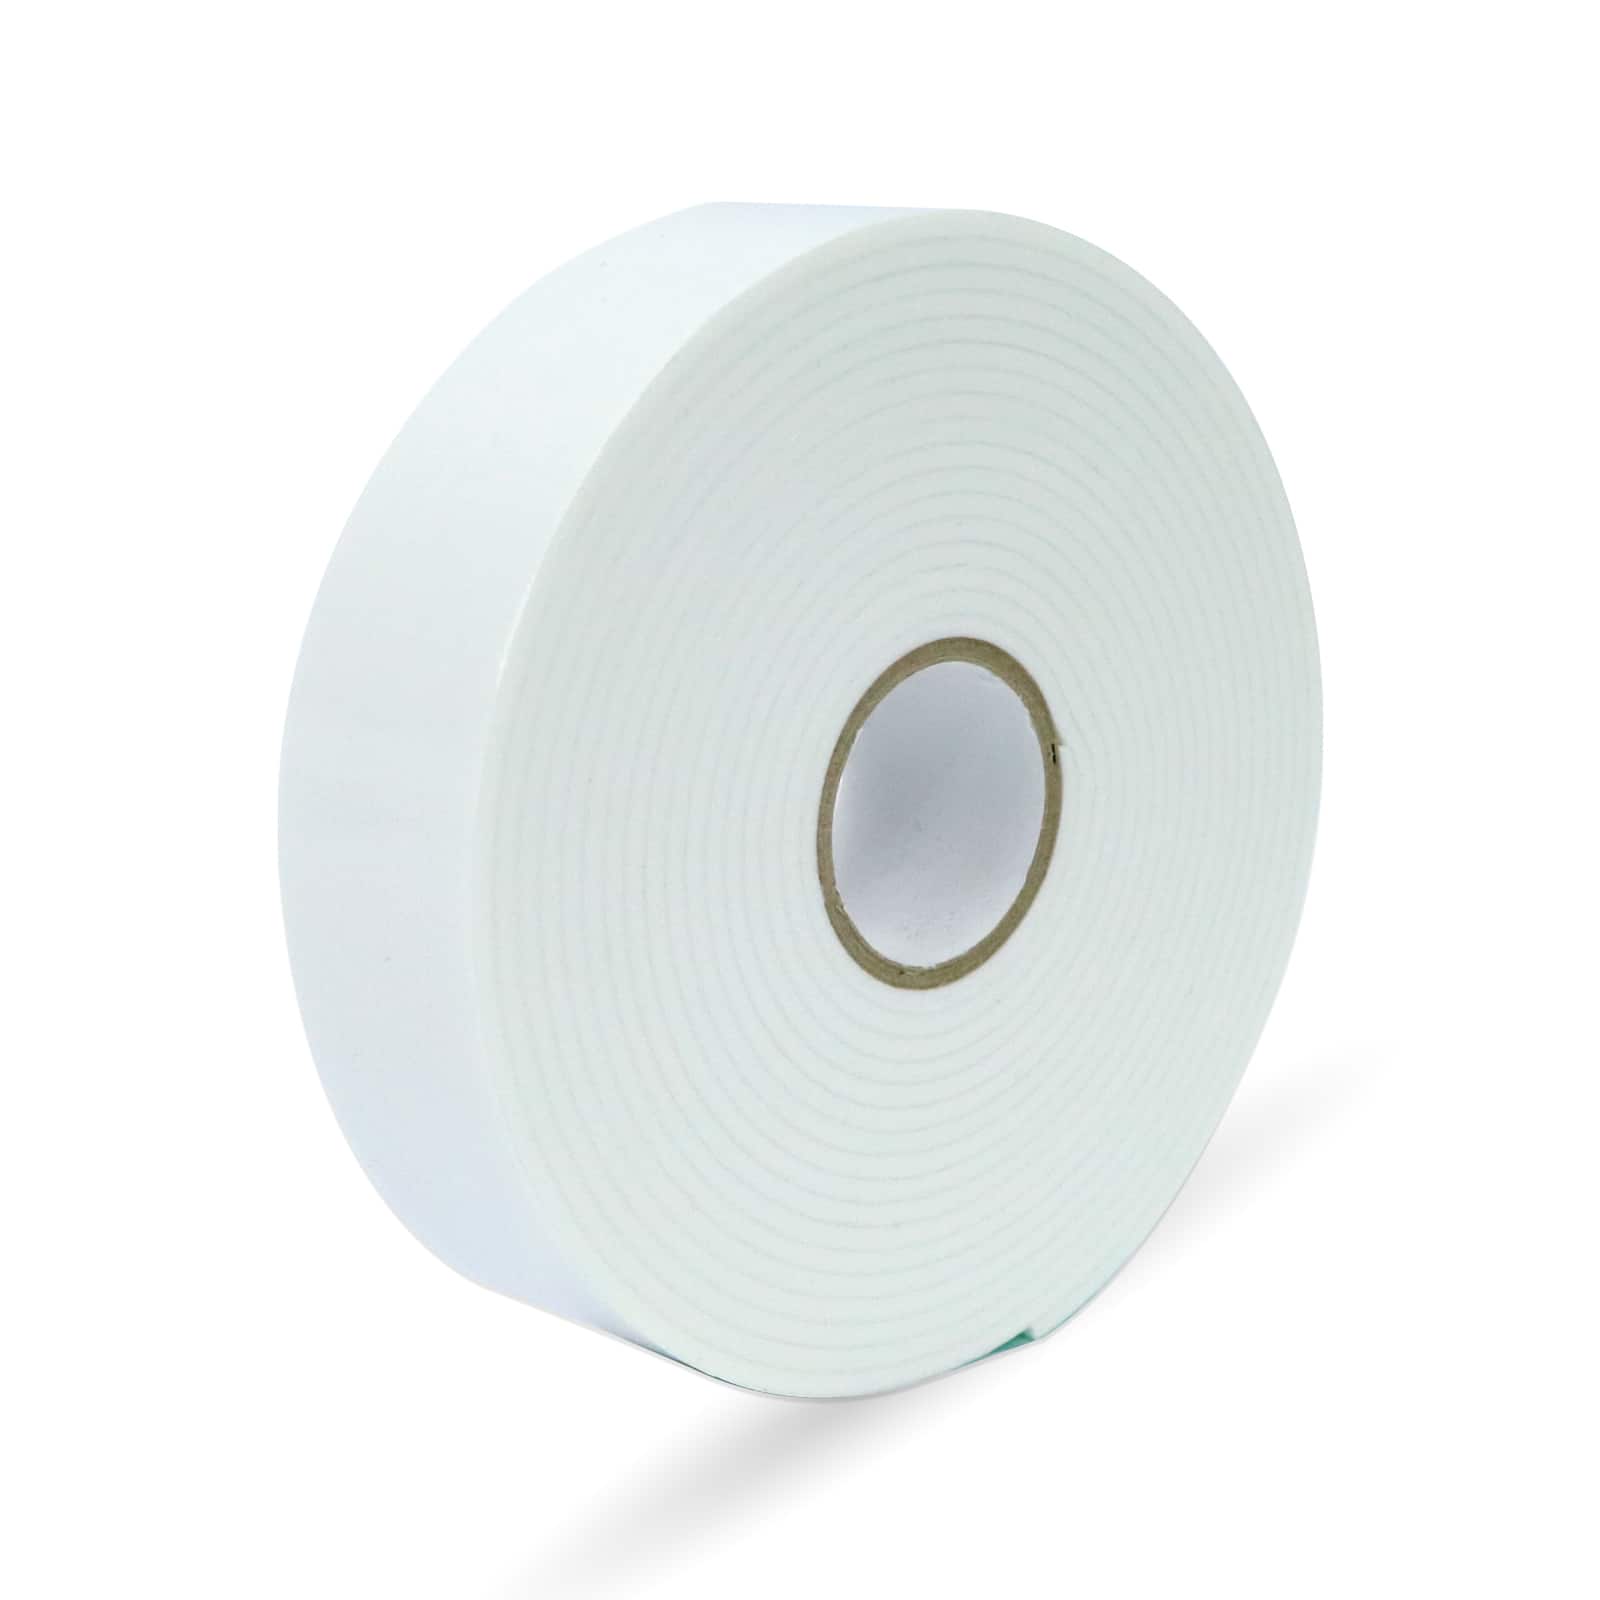 White Floral Tape by Ashland™